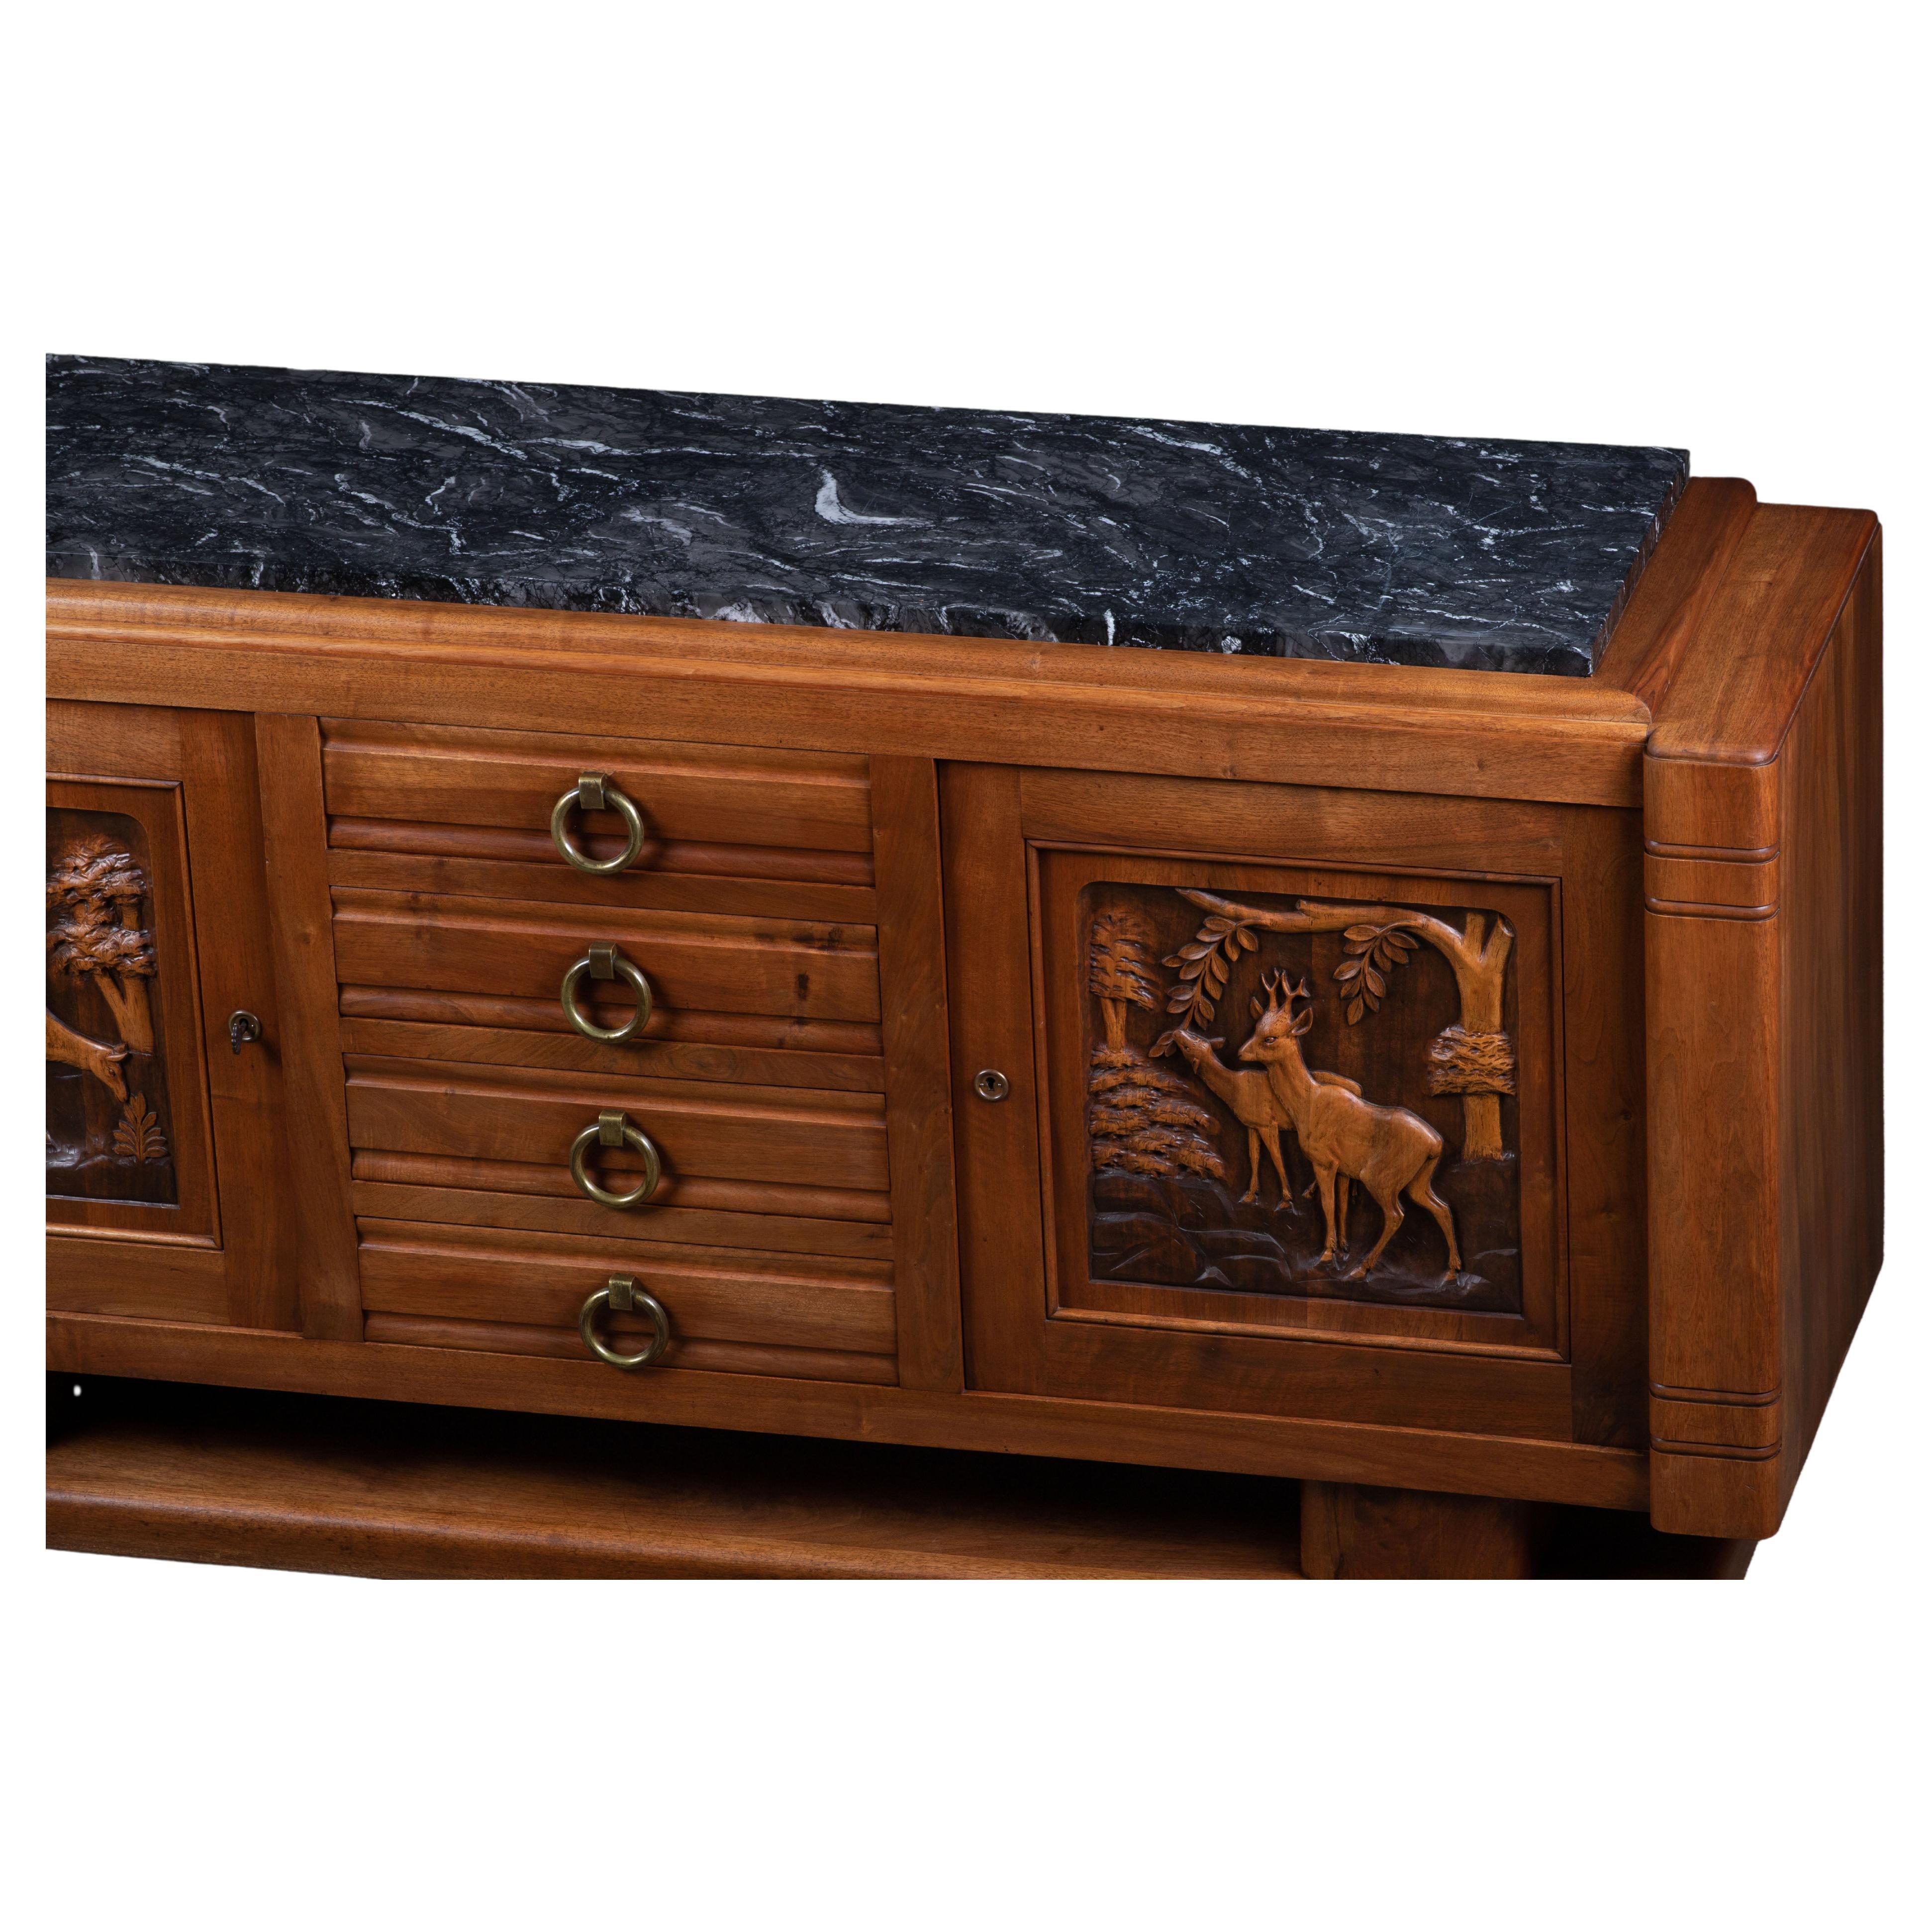 A large handcarved sideboard / credenza France, c1940s.
Consists of 4 central drawer and two storage compartments. 
Inlaid wood center shelves, brass detailing and handcarved design doors make this piece really stand out.
The sideboard is in